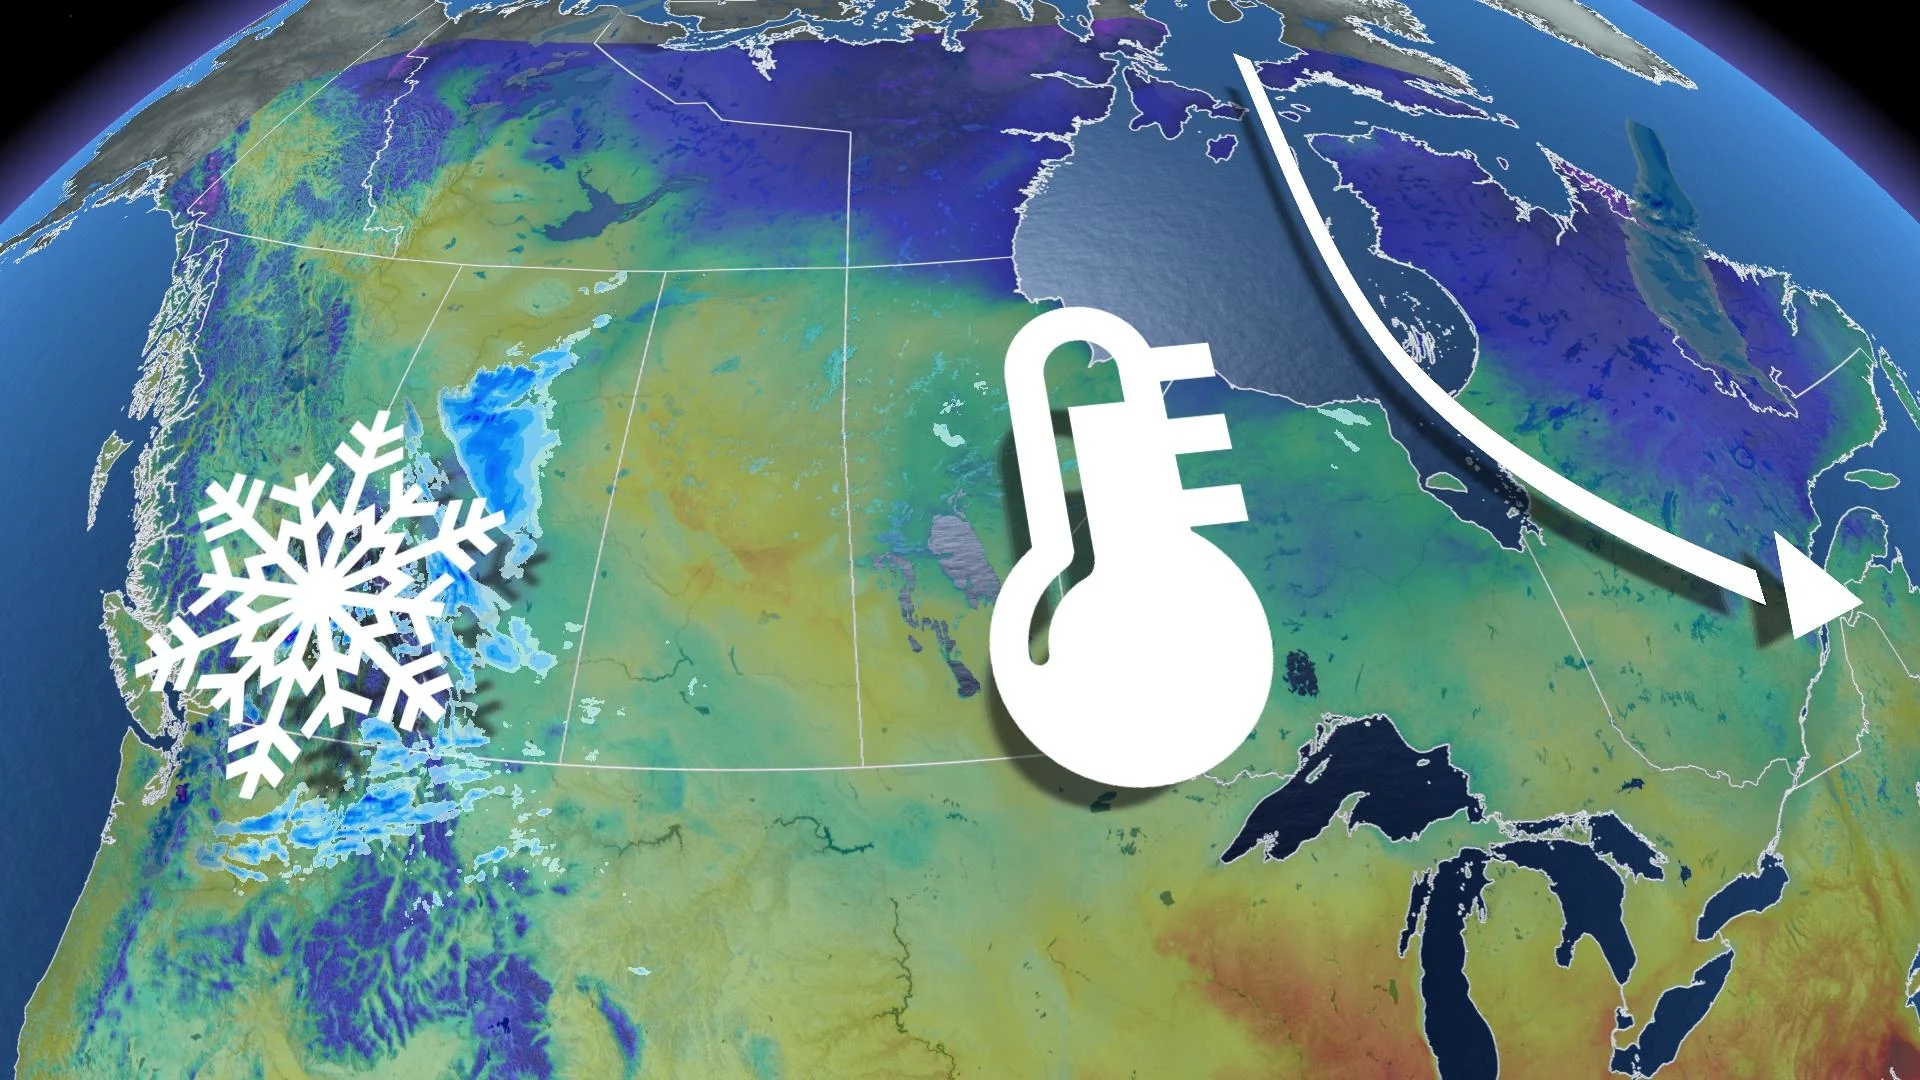 Saskatchewan looks to land on the warmer side of normal this May. See how things shape up in our monthly outlook, here